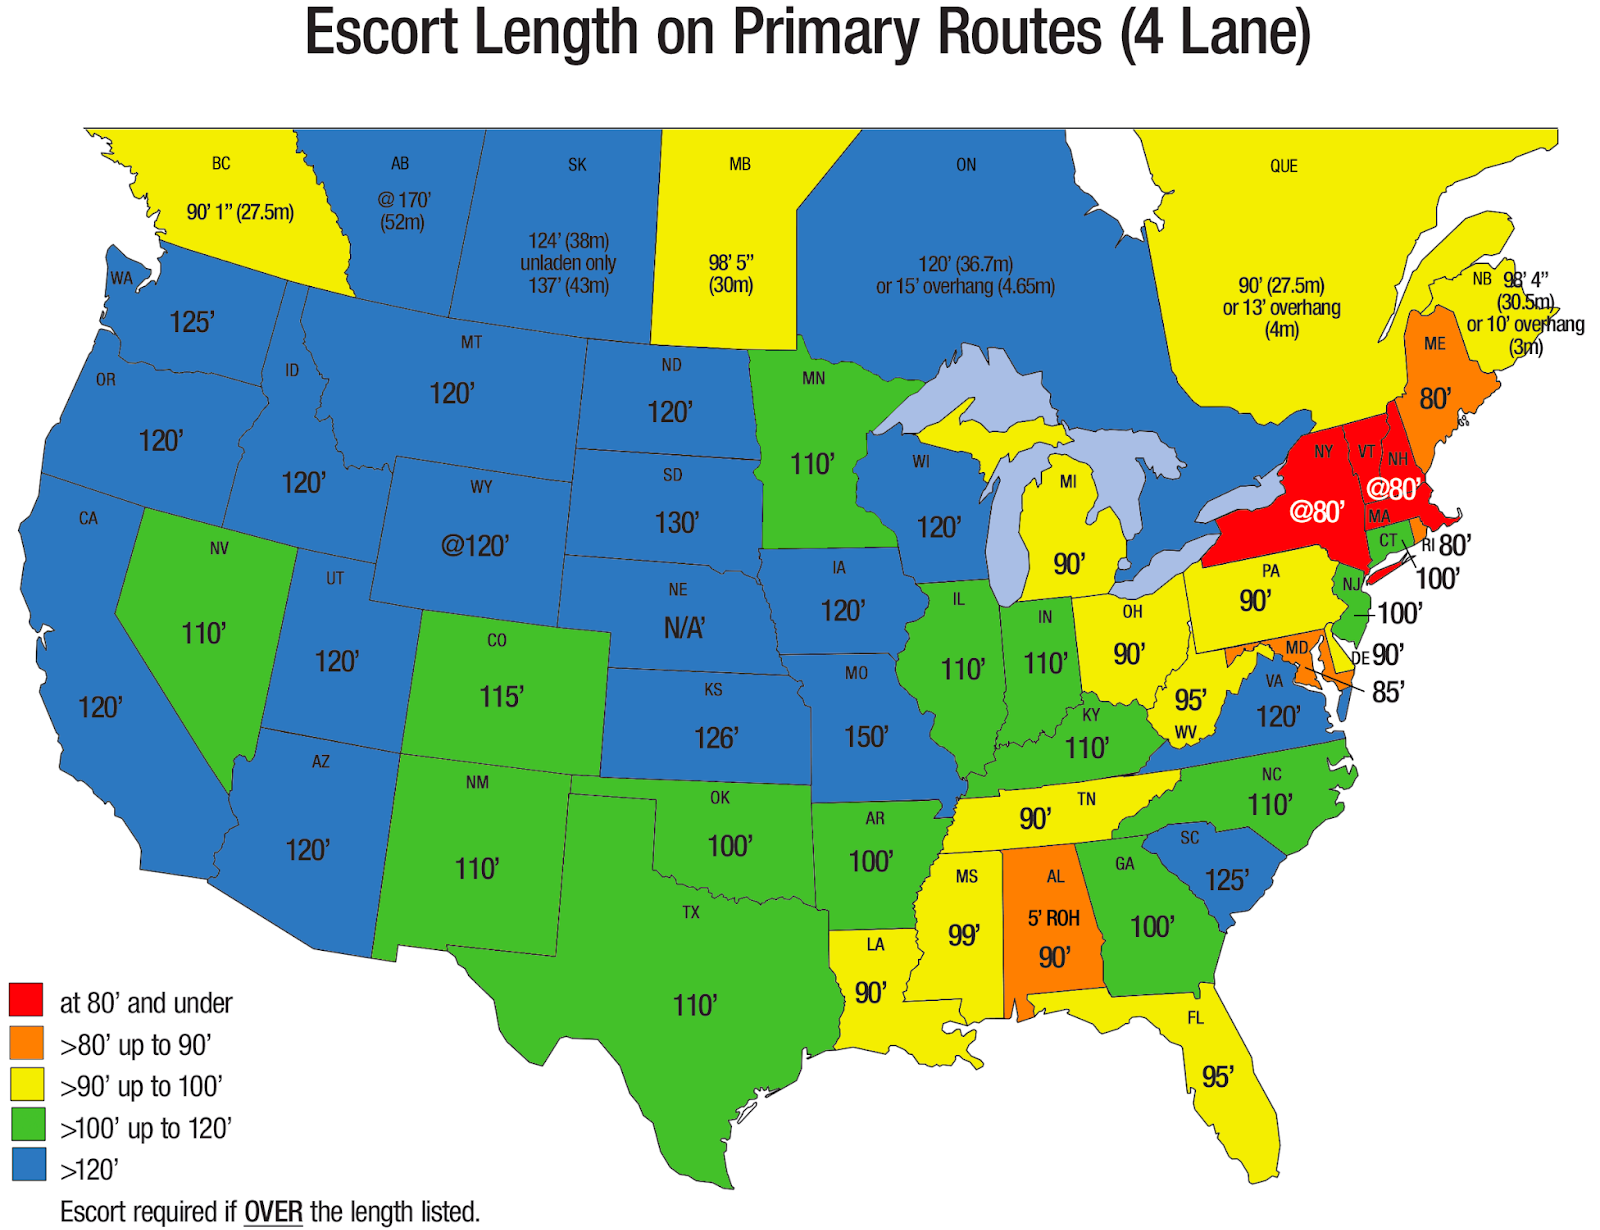 Escorts Required In Each State for Width on Four Lane Road